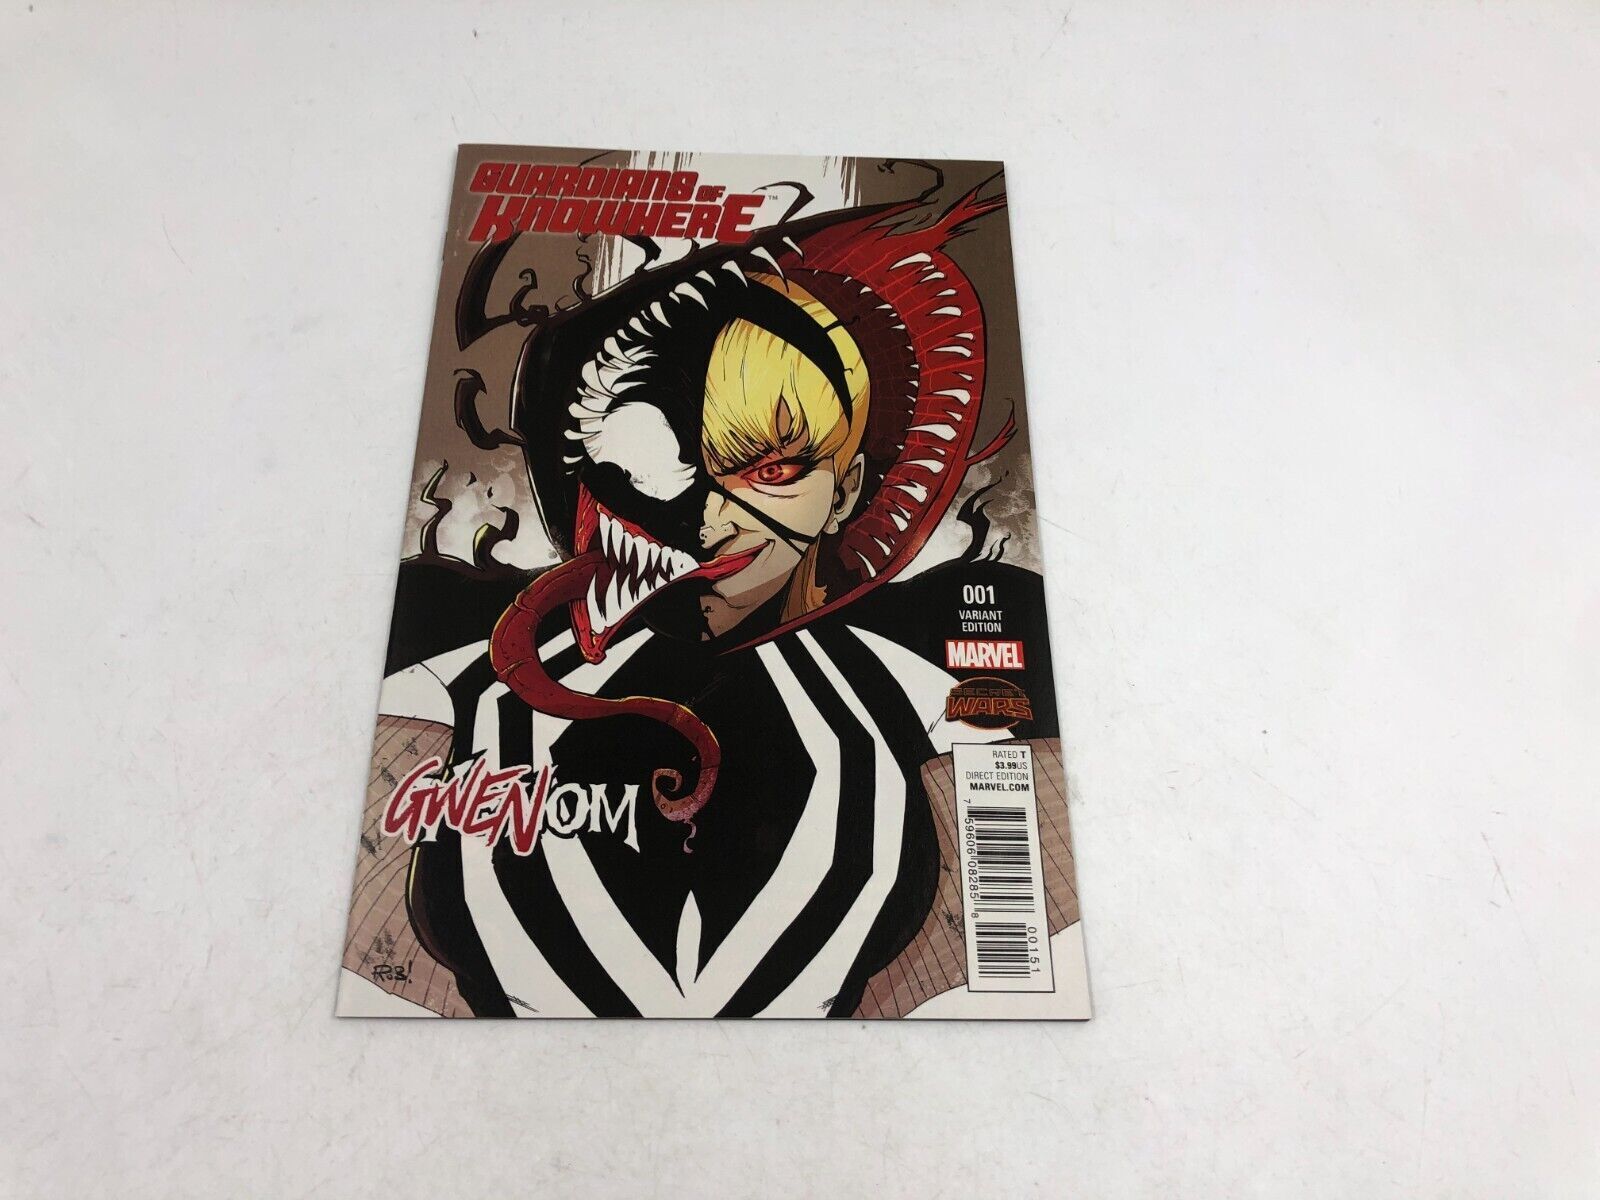 Guardians of Nowhere #1 Guillory Variant 1st App Gwenom Marvel 2015